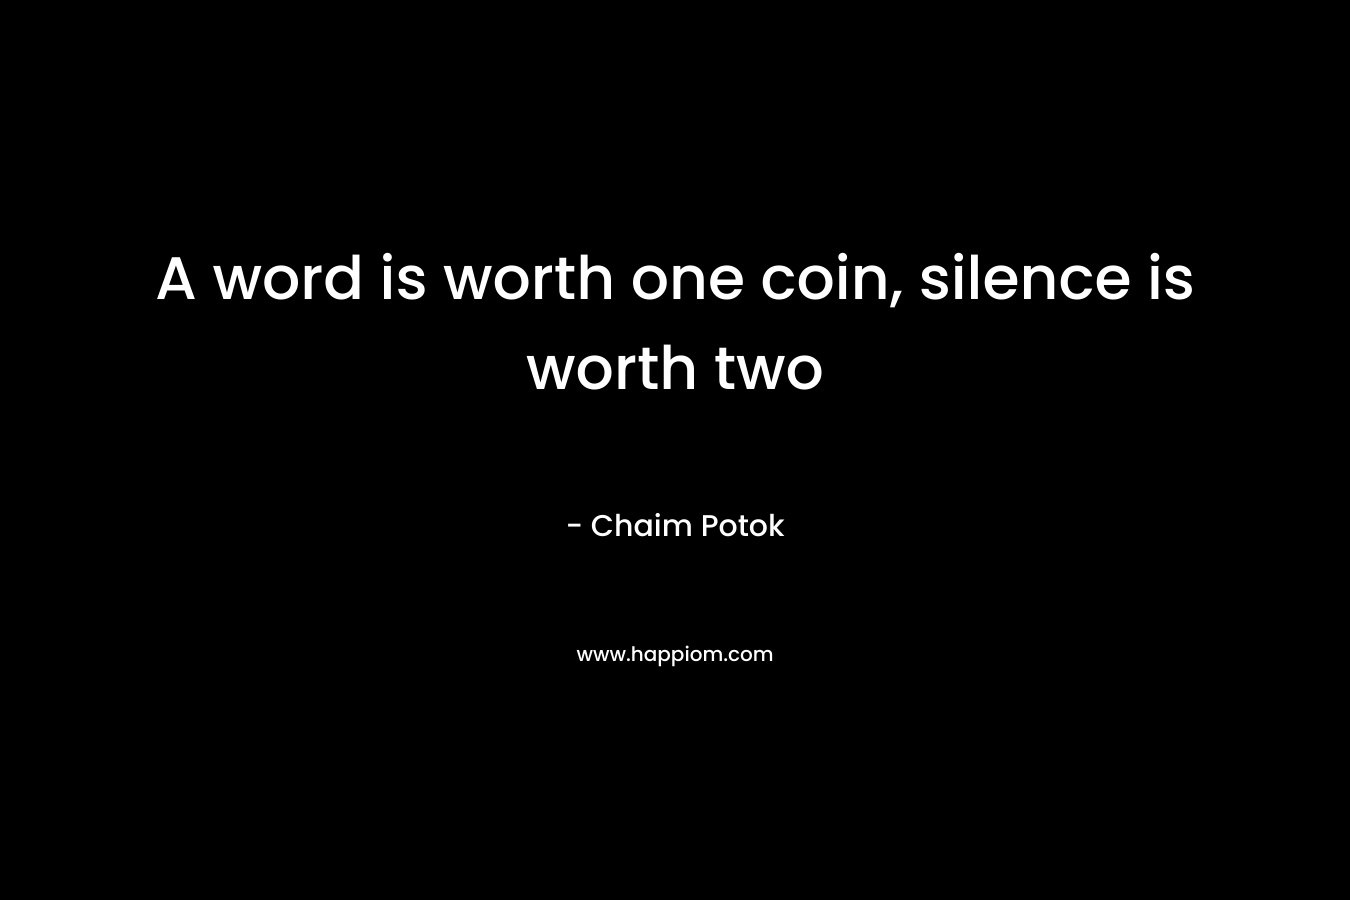 A word is worth one coin, silence is worth two